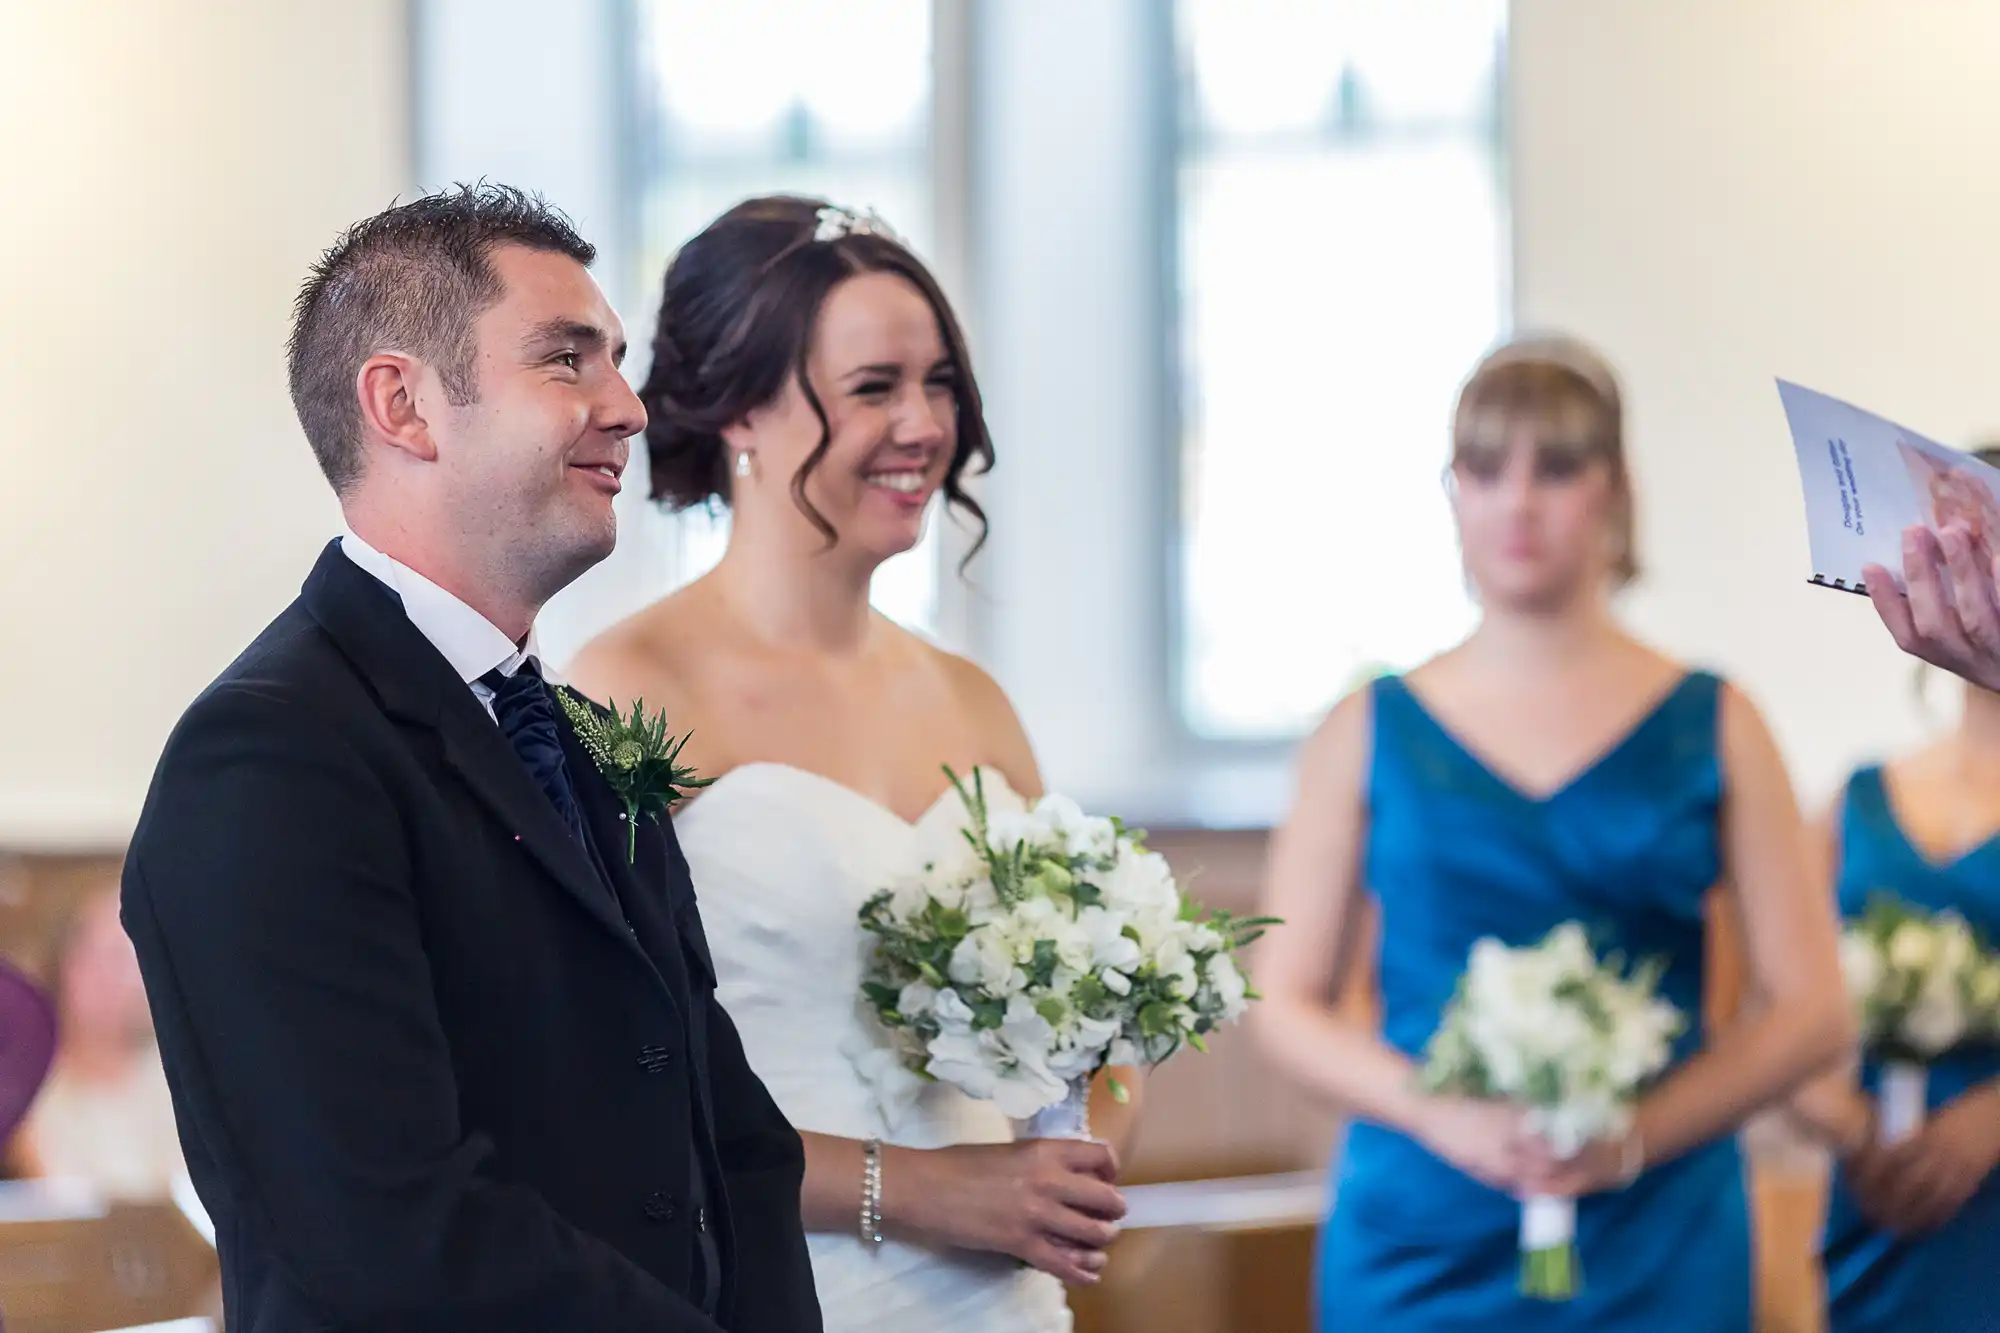 A bride and groom smiling during a wedding ceremony, holding hands, with bridesmaids in blue dresses in the background.